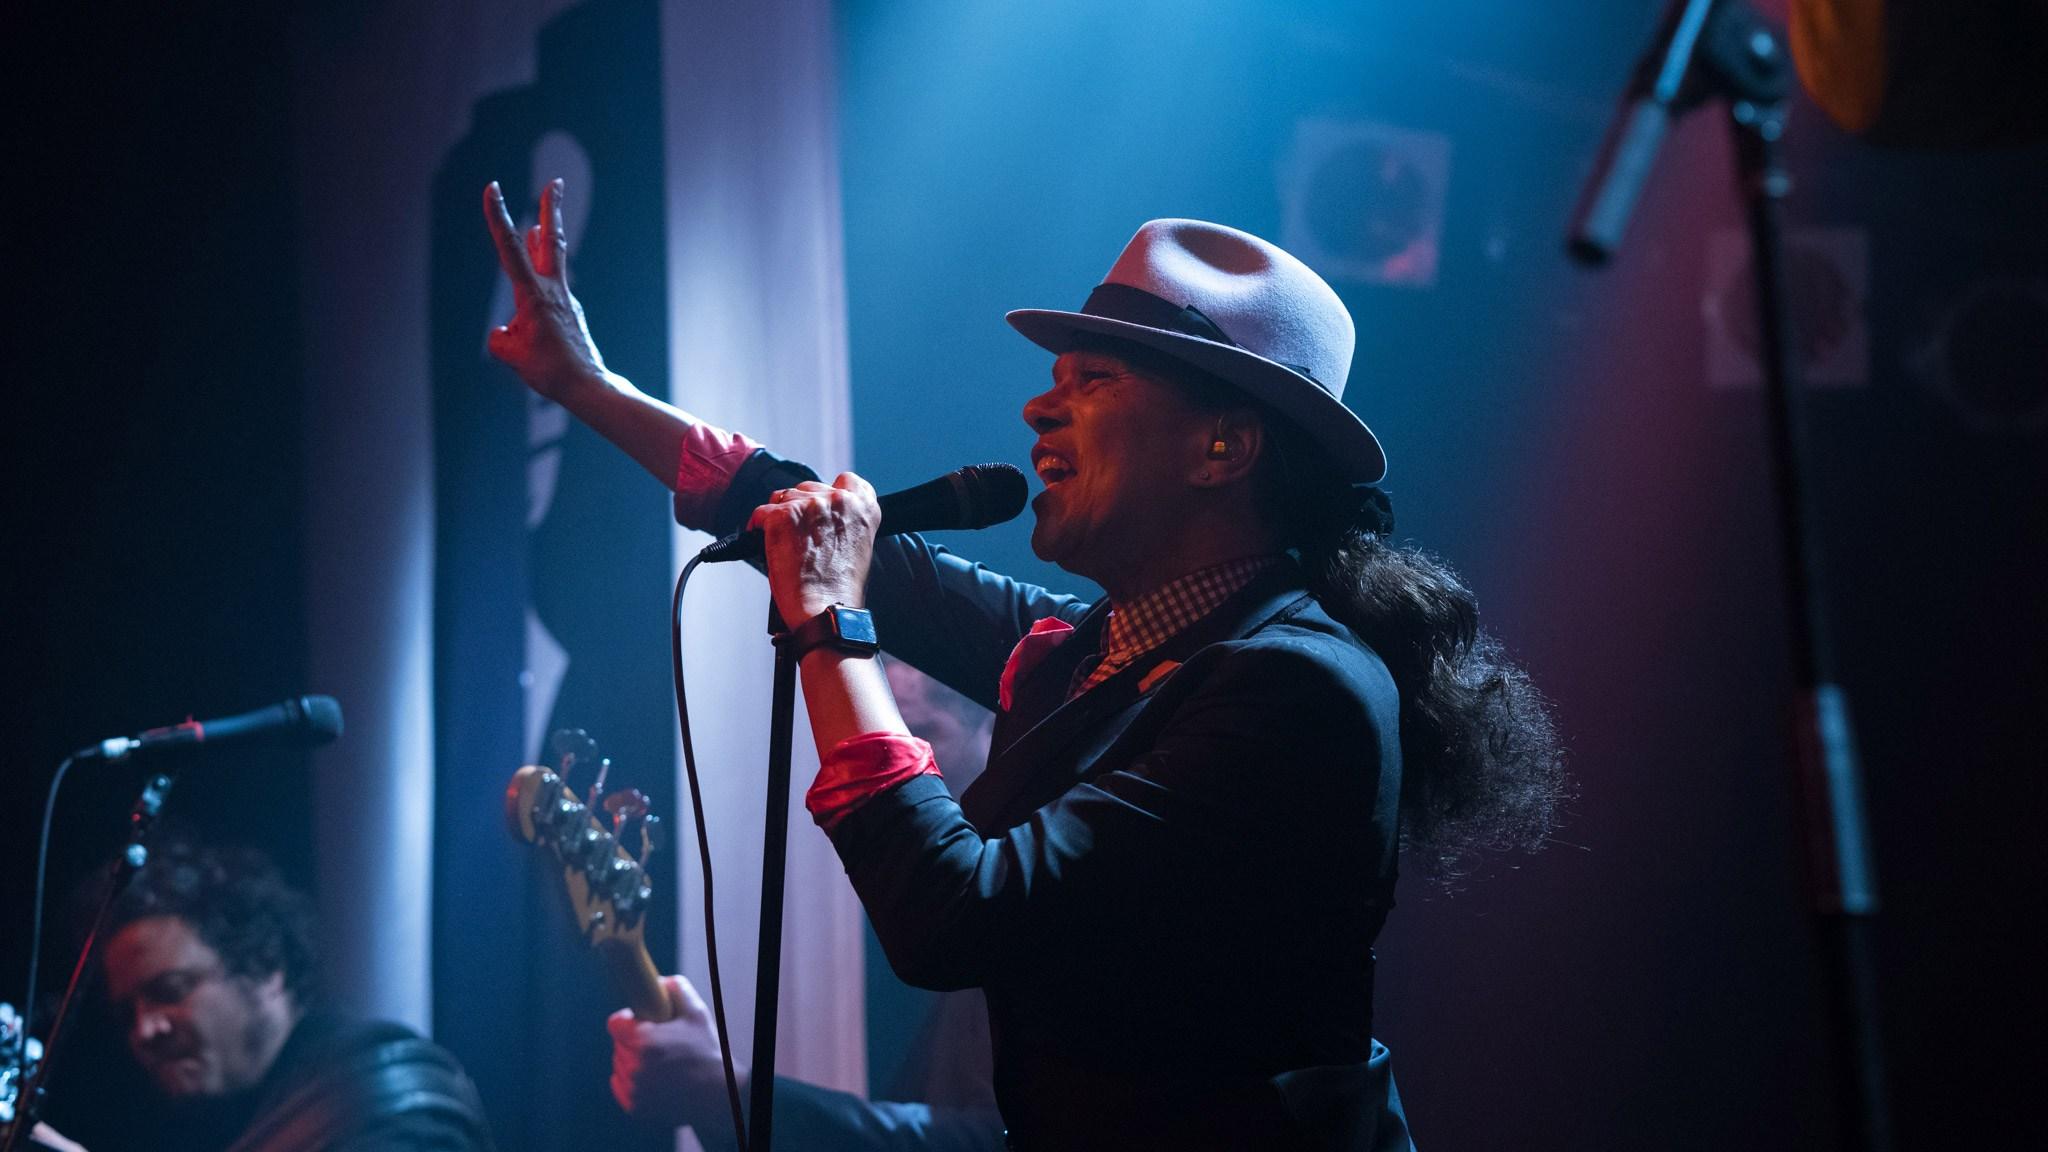 Concert Review Selecter & The Beat, Auckland New Zealand, 2018